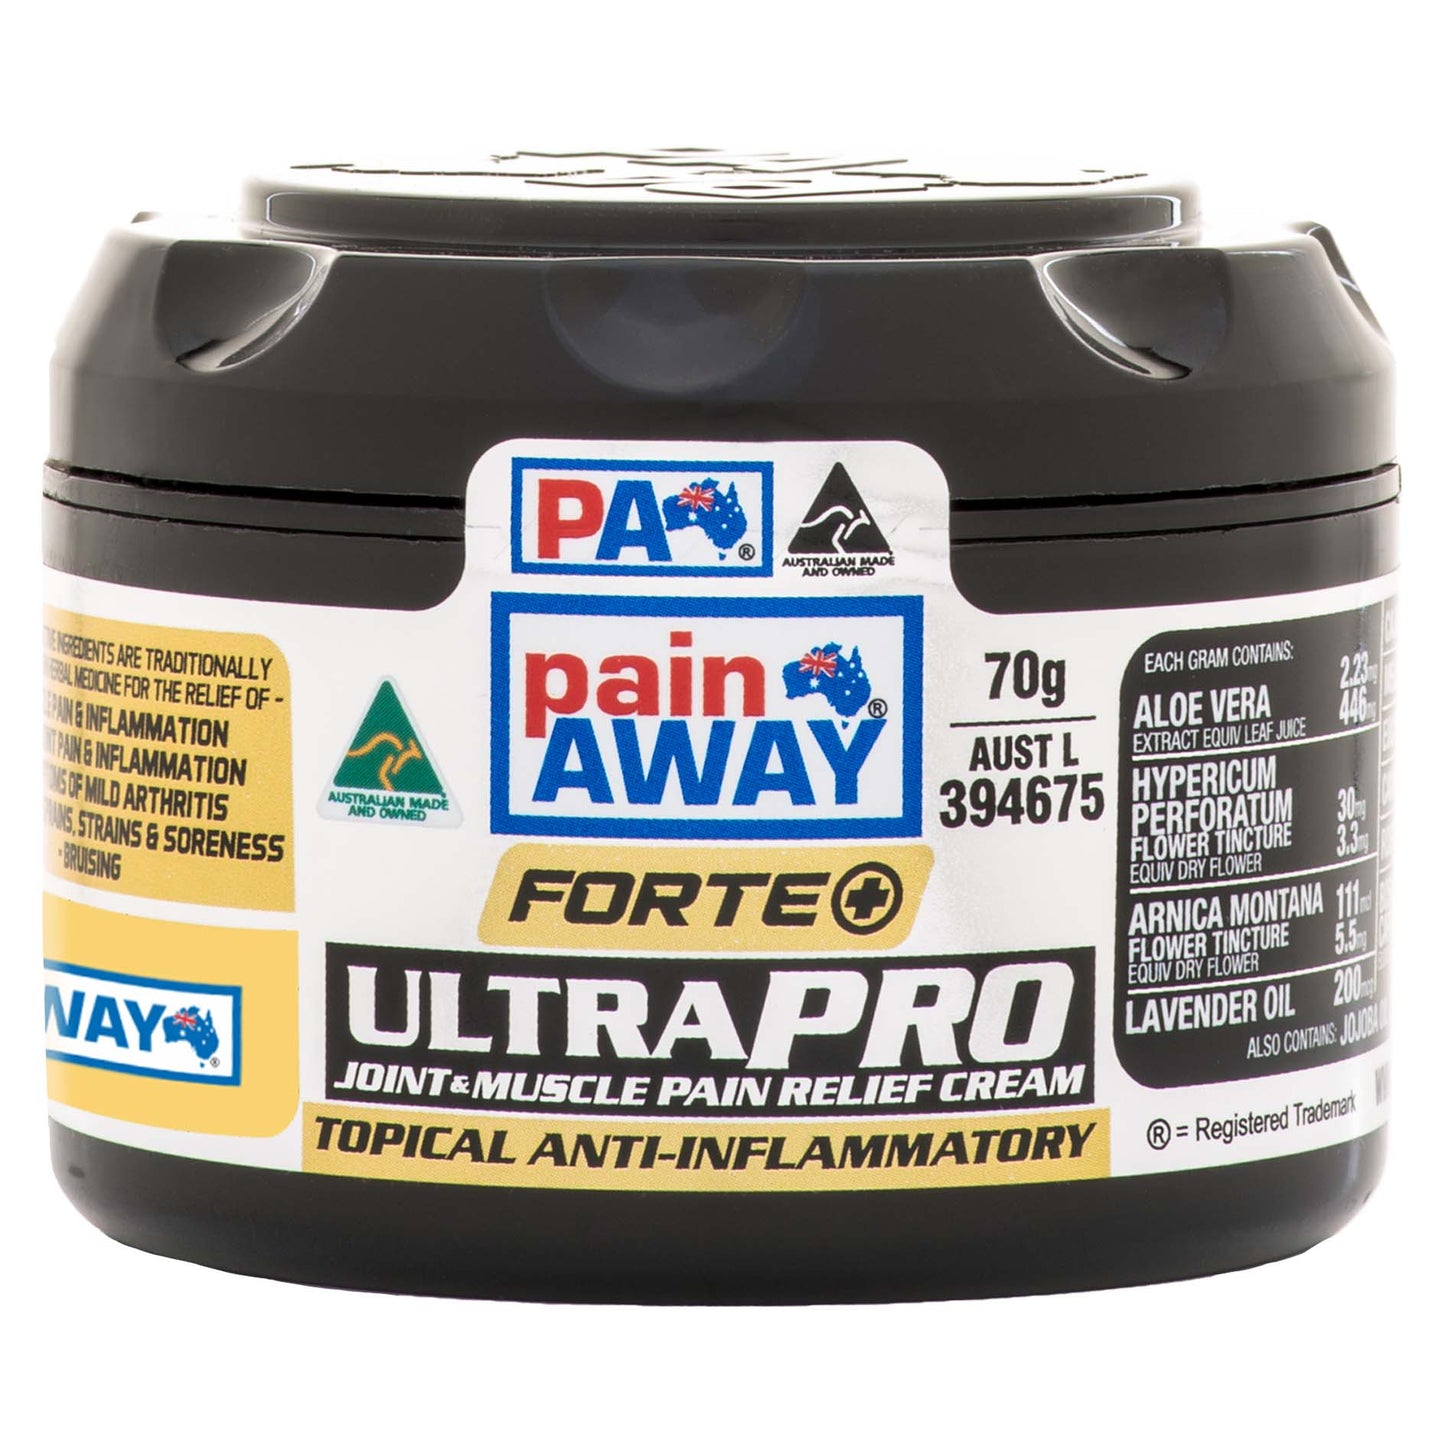 PAIN AWAY FORTE+ ULTRA PRO JOINT & MUSCLE PAIN RELIEF CREAM 70G